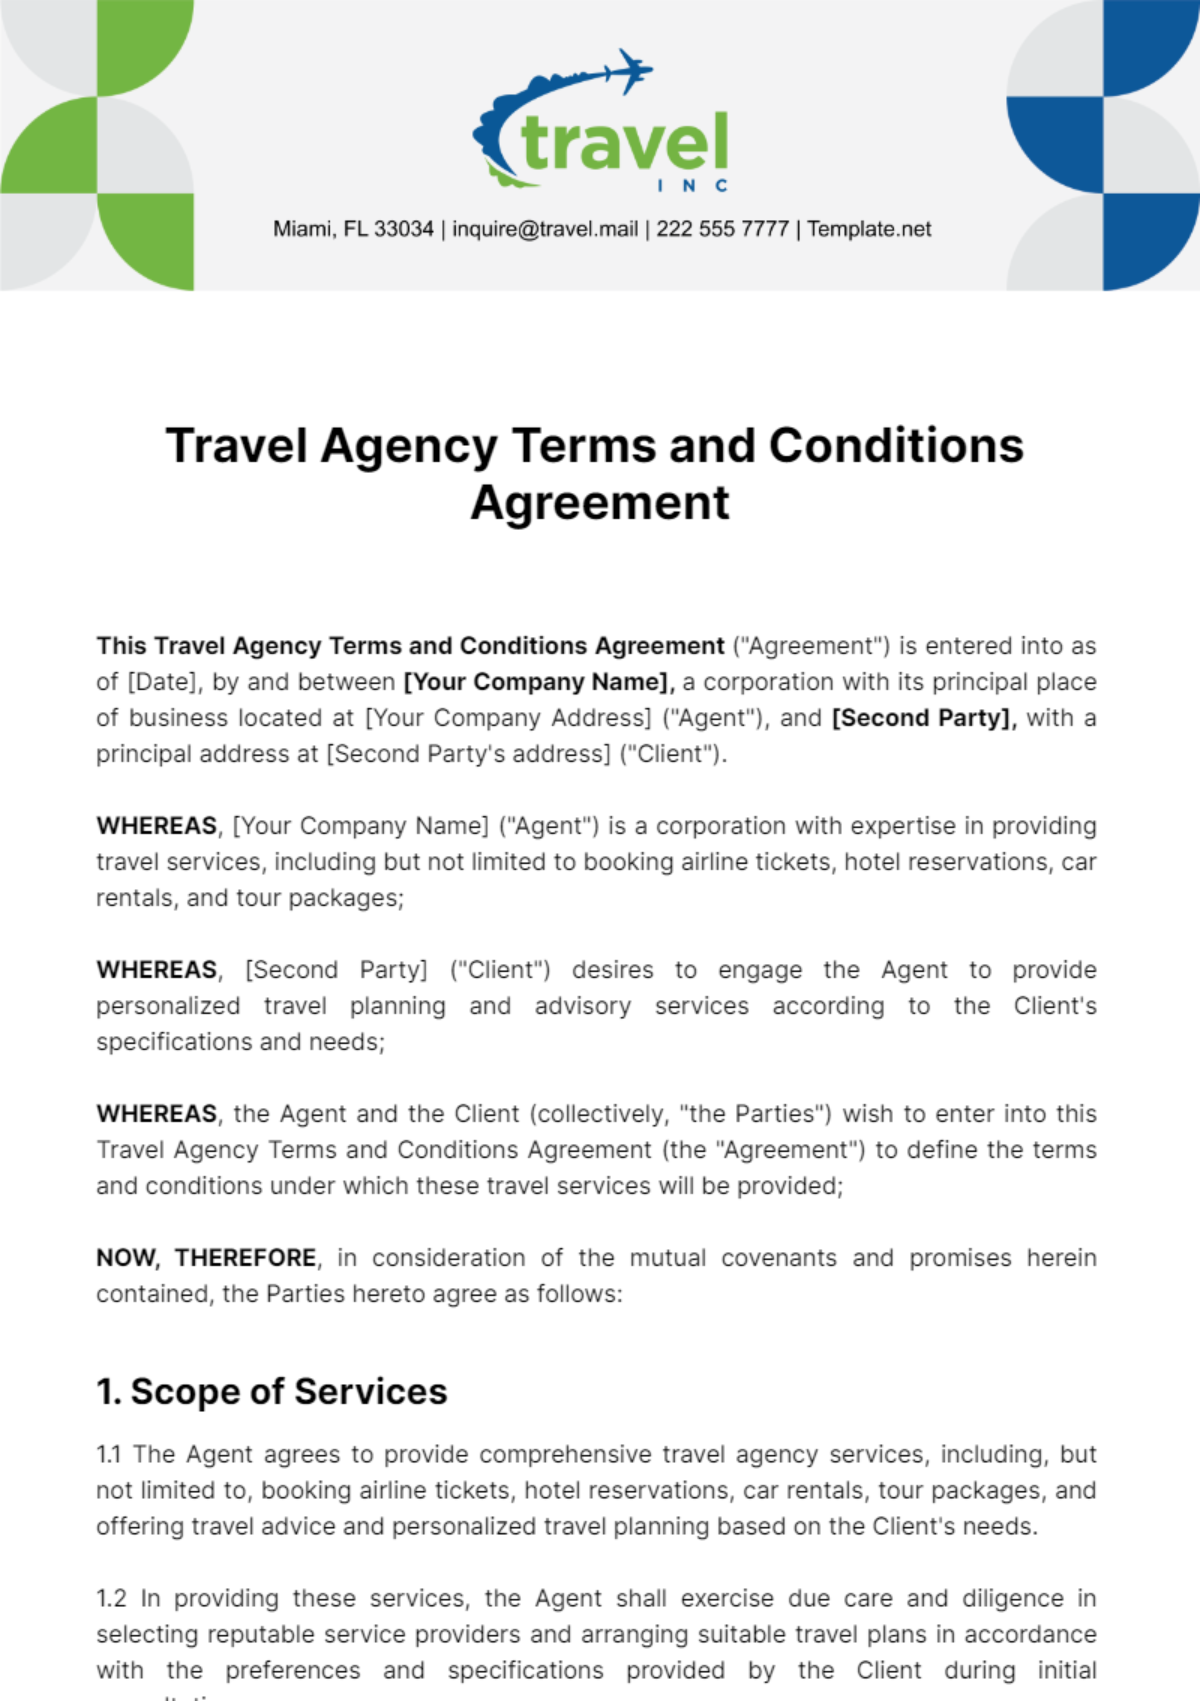 Free Travel Agency Terms and Conditions Agreement Template